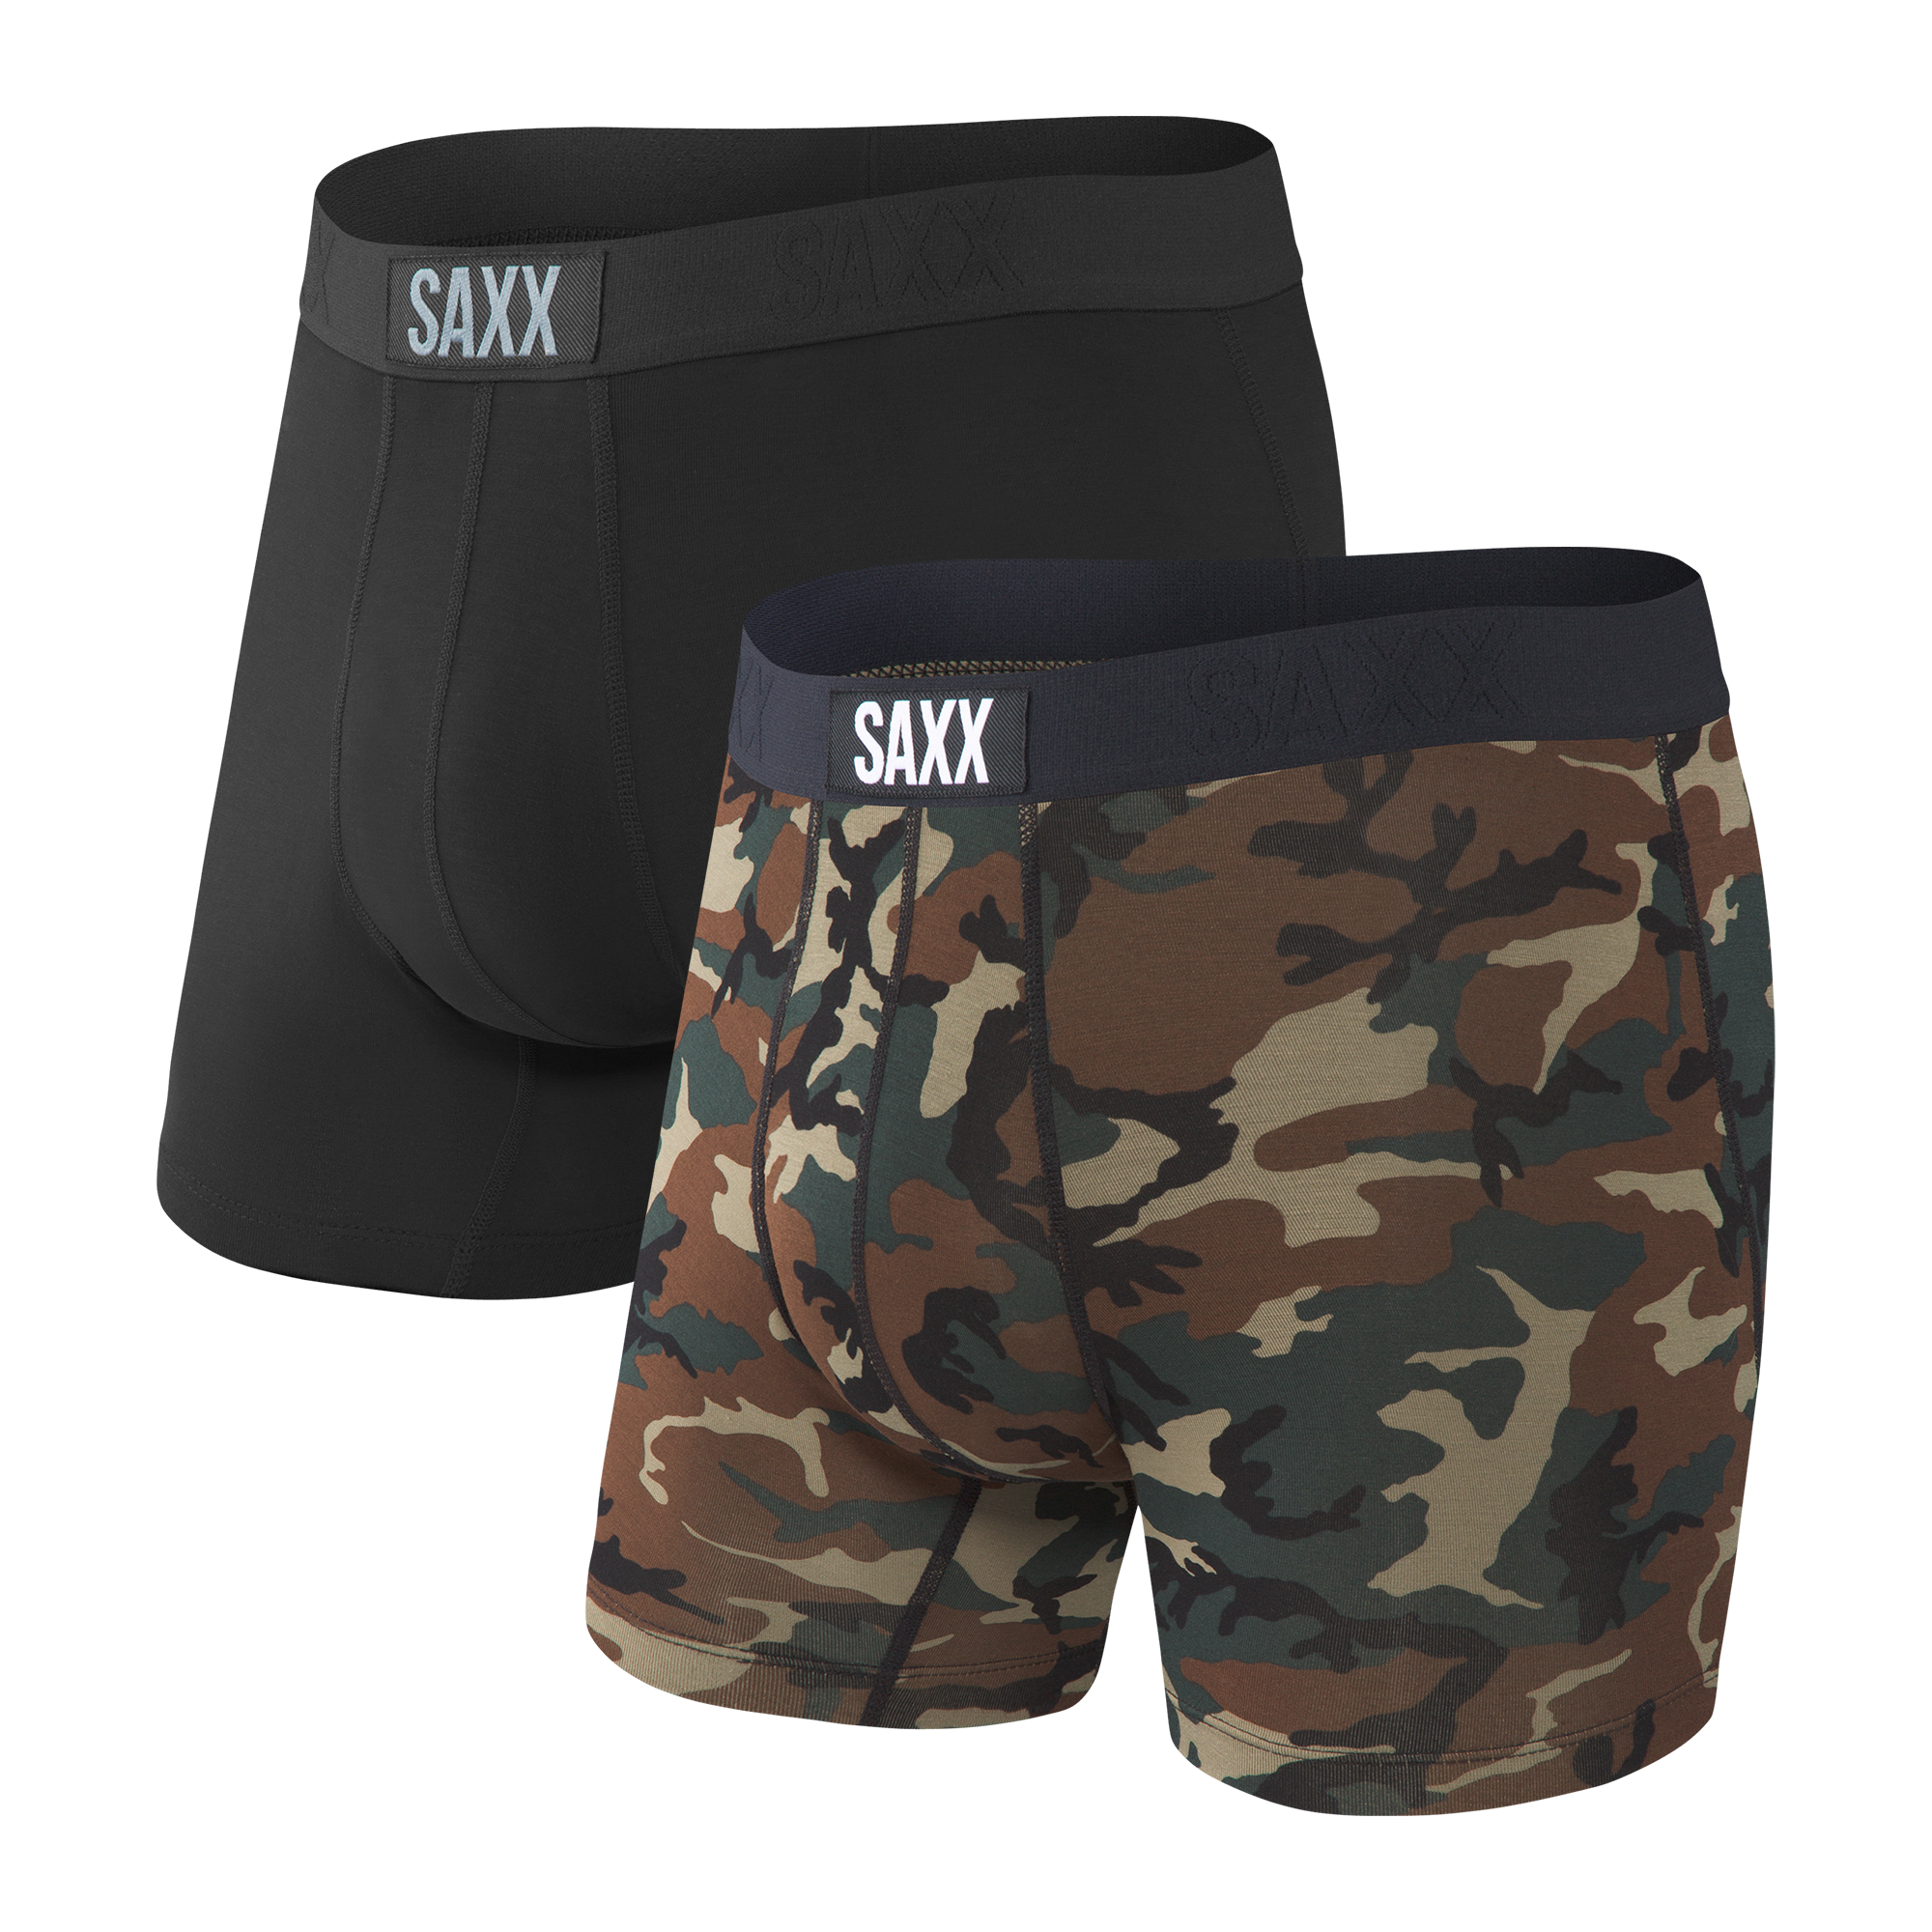 Saxx Daytripper Boxer Brief Fly 2-Pack - Synthetic base layer